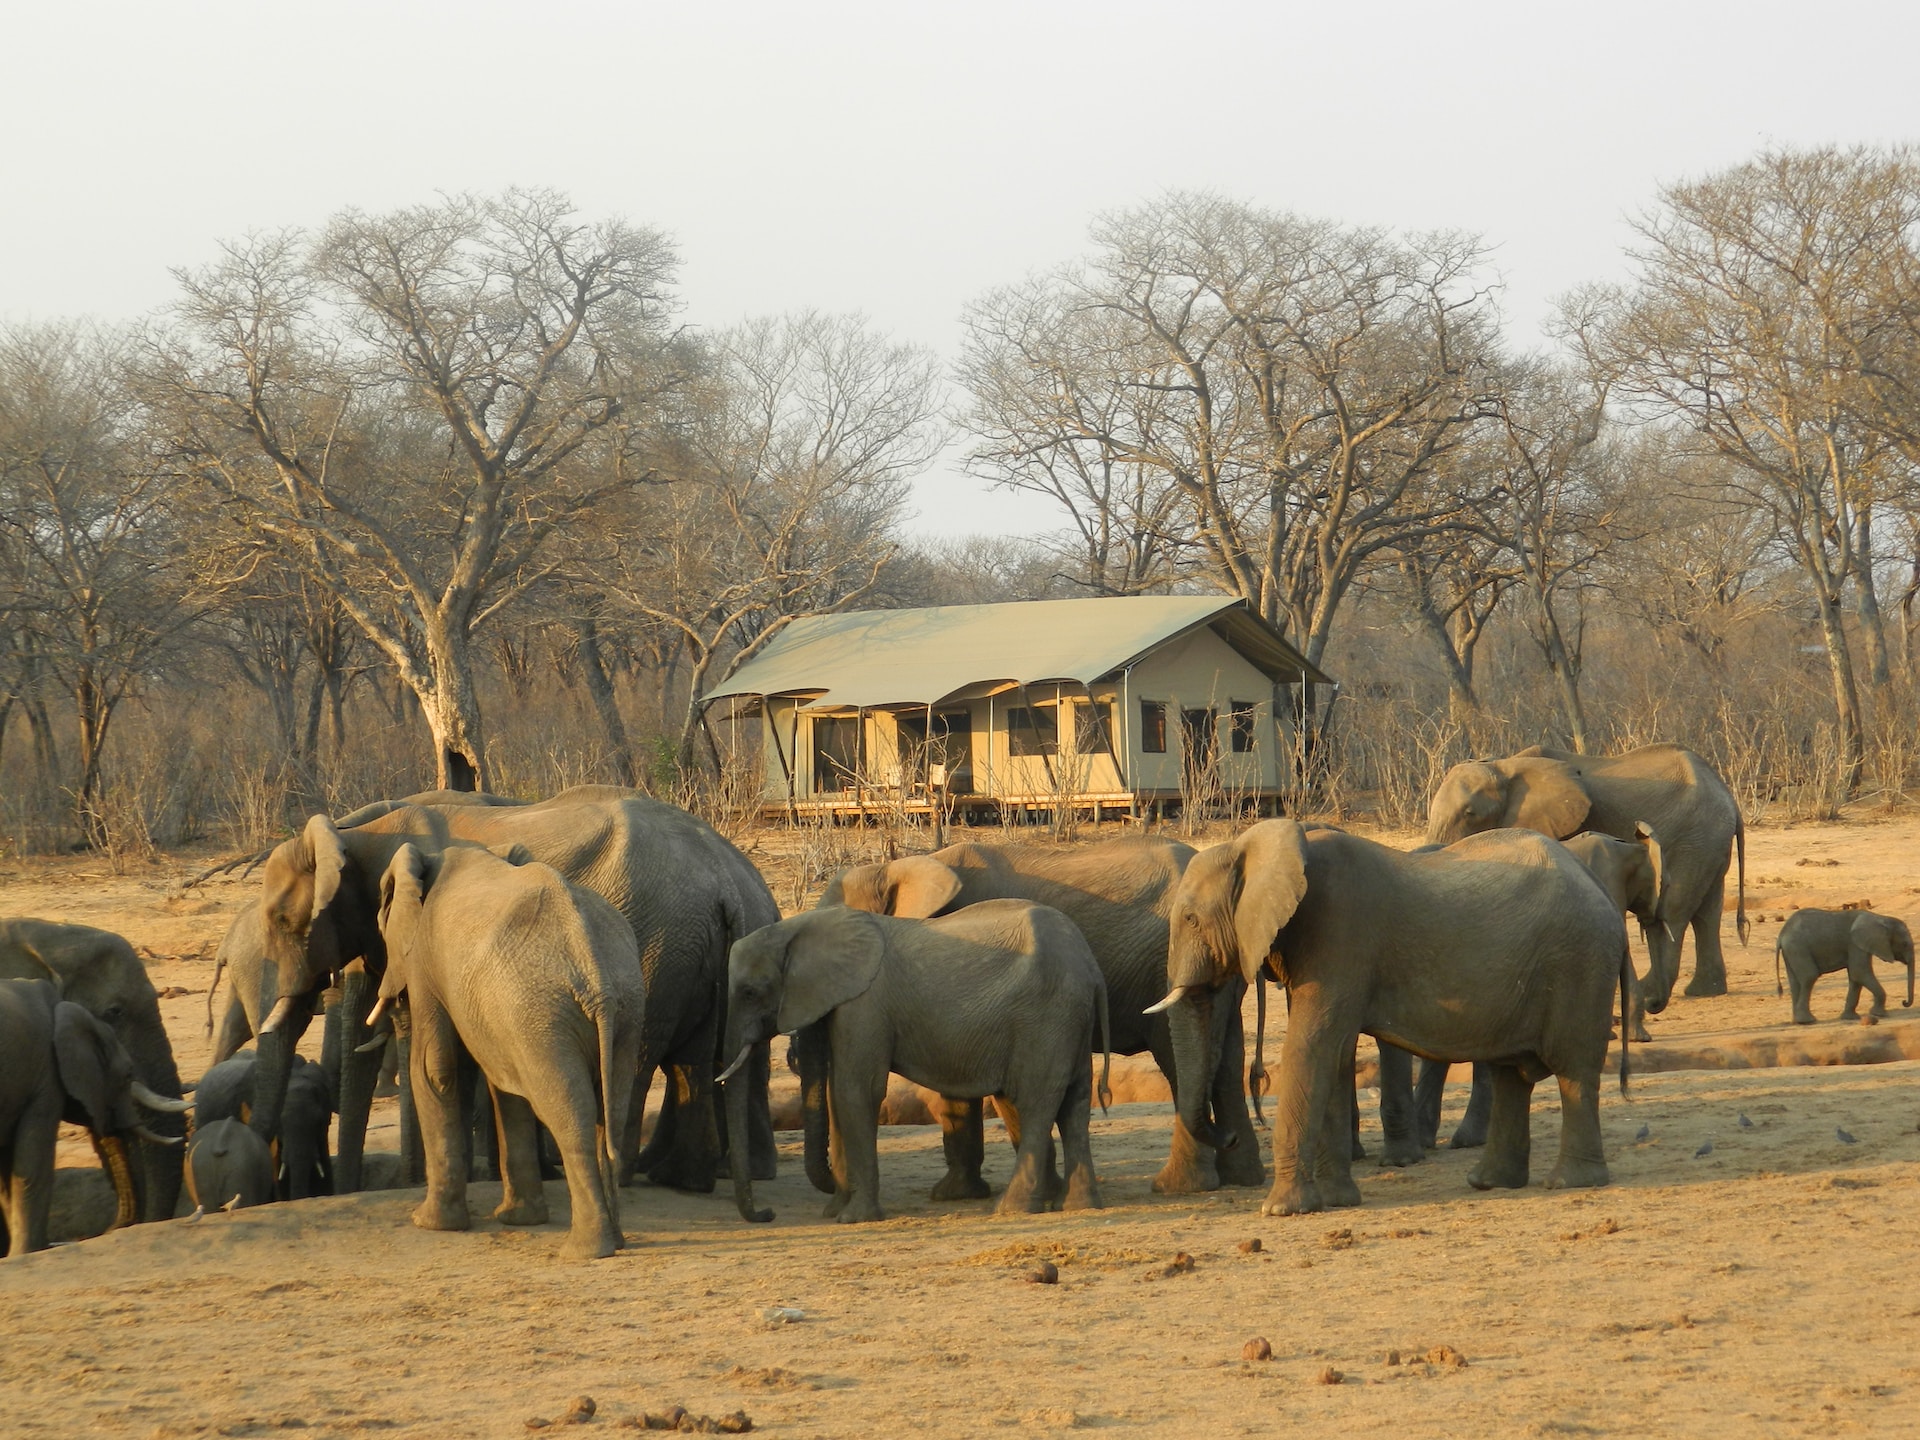 Elephants at Verney’s Camp in Hwange, Zimbabwe (photo by Claire Roadley)